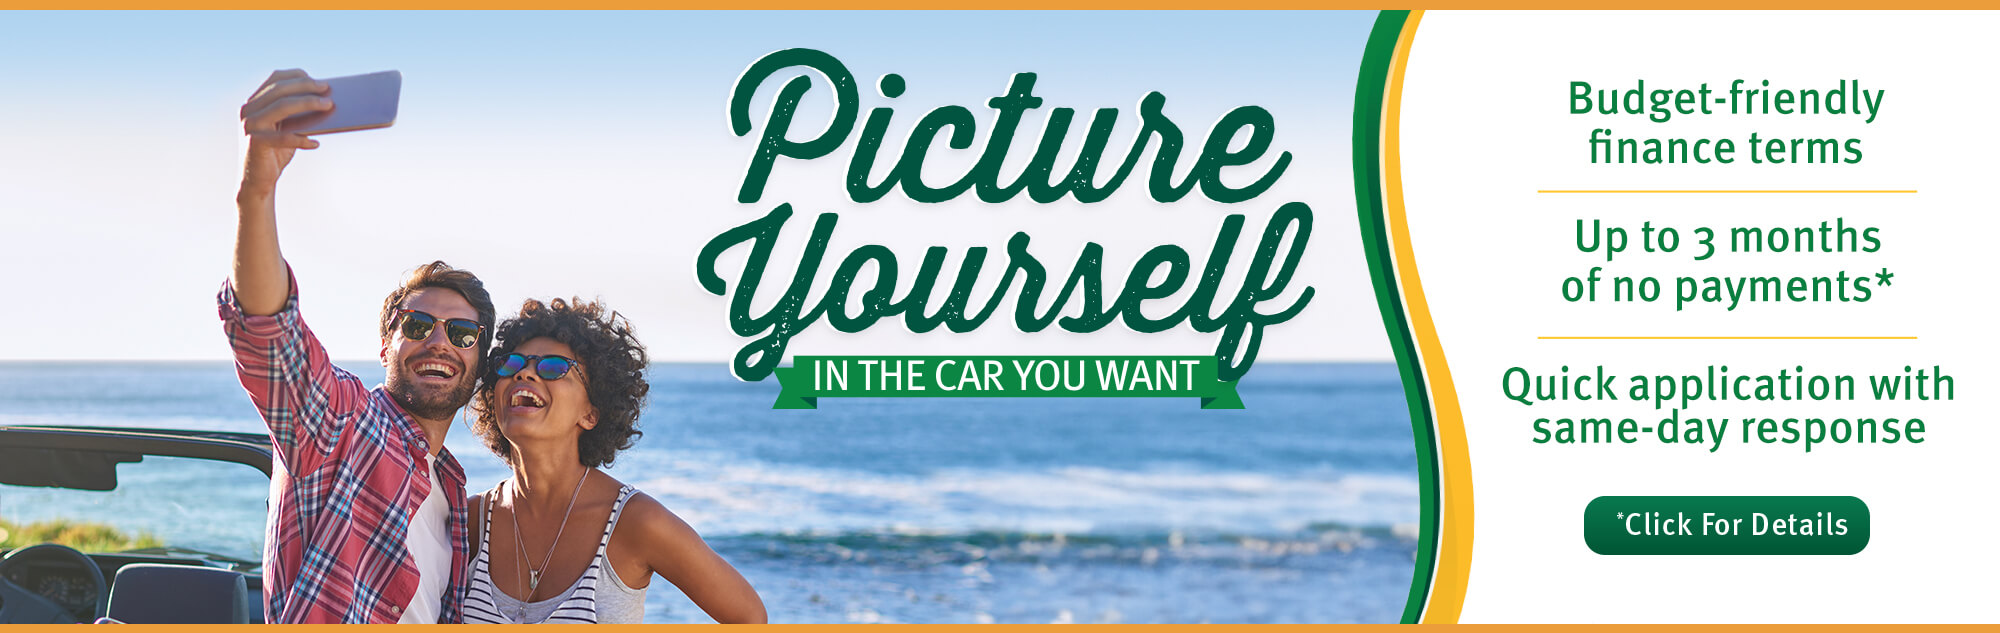 Picture Yourself In The Car You Want - Budget-friendly finance terms - Up to 3 months of no payments* - Quick application with same-day response - Click For Details 